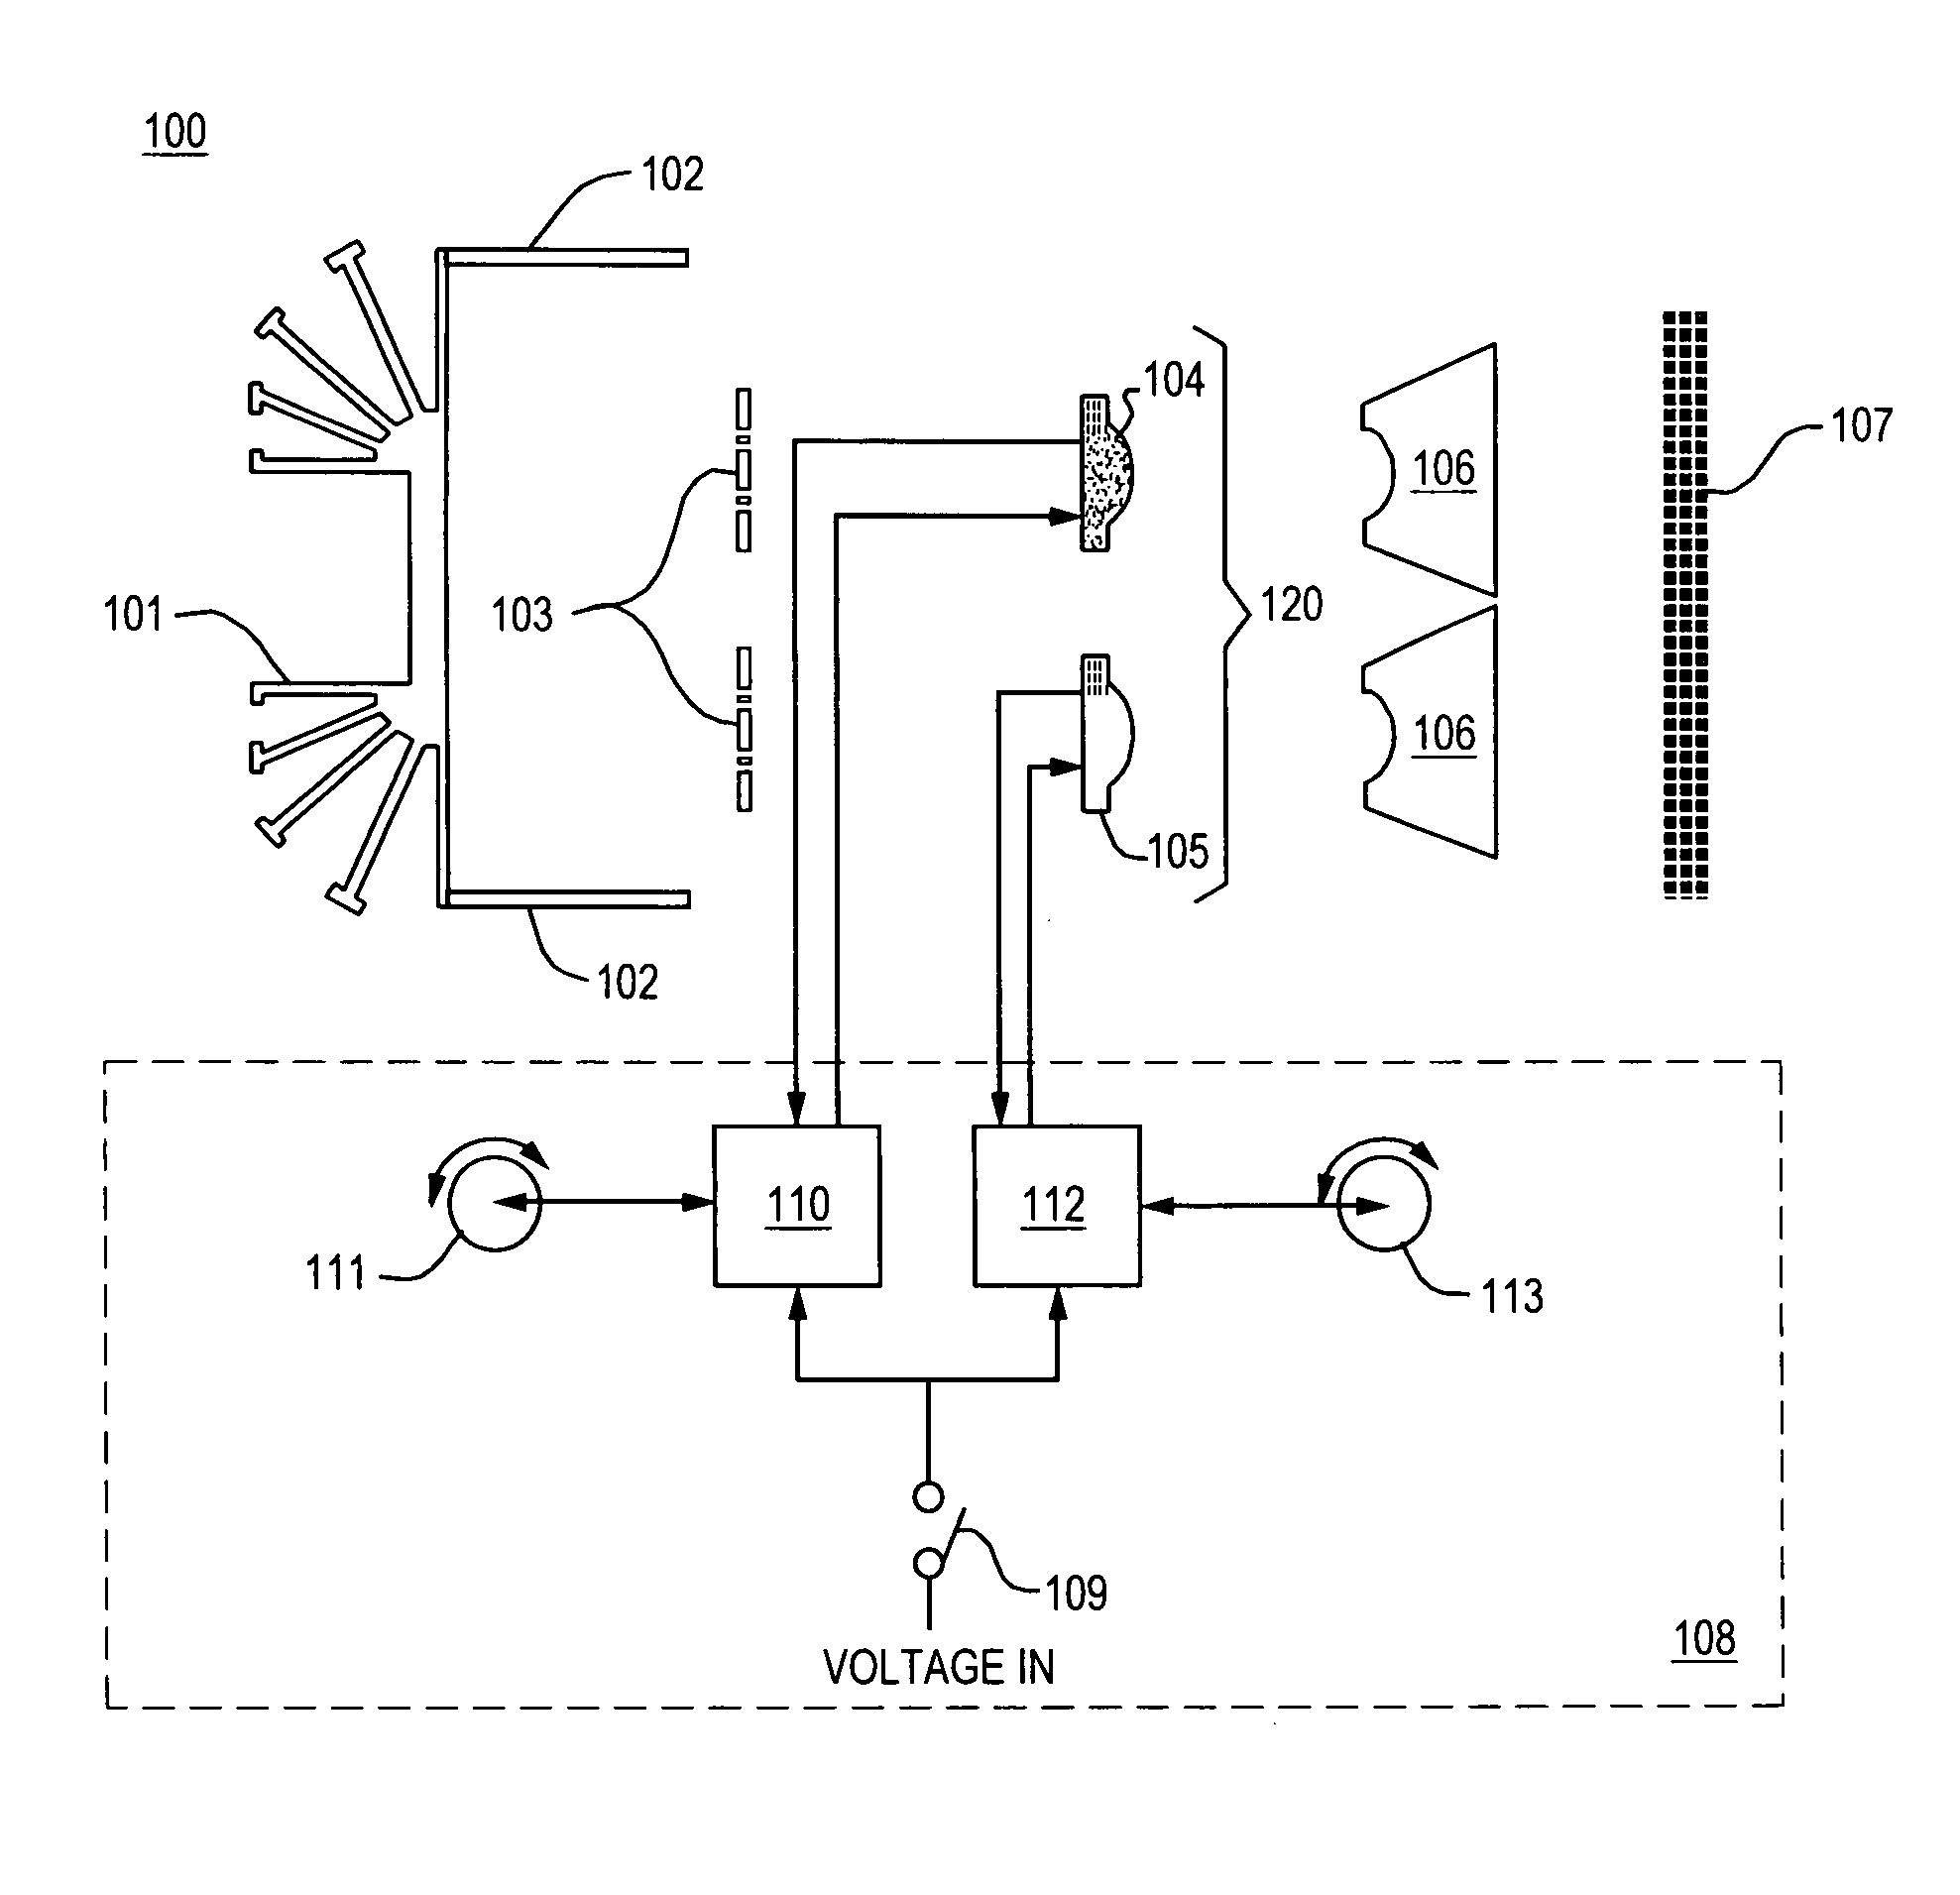 Virtual single light source having variable color temperature with integral thermal management